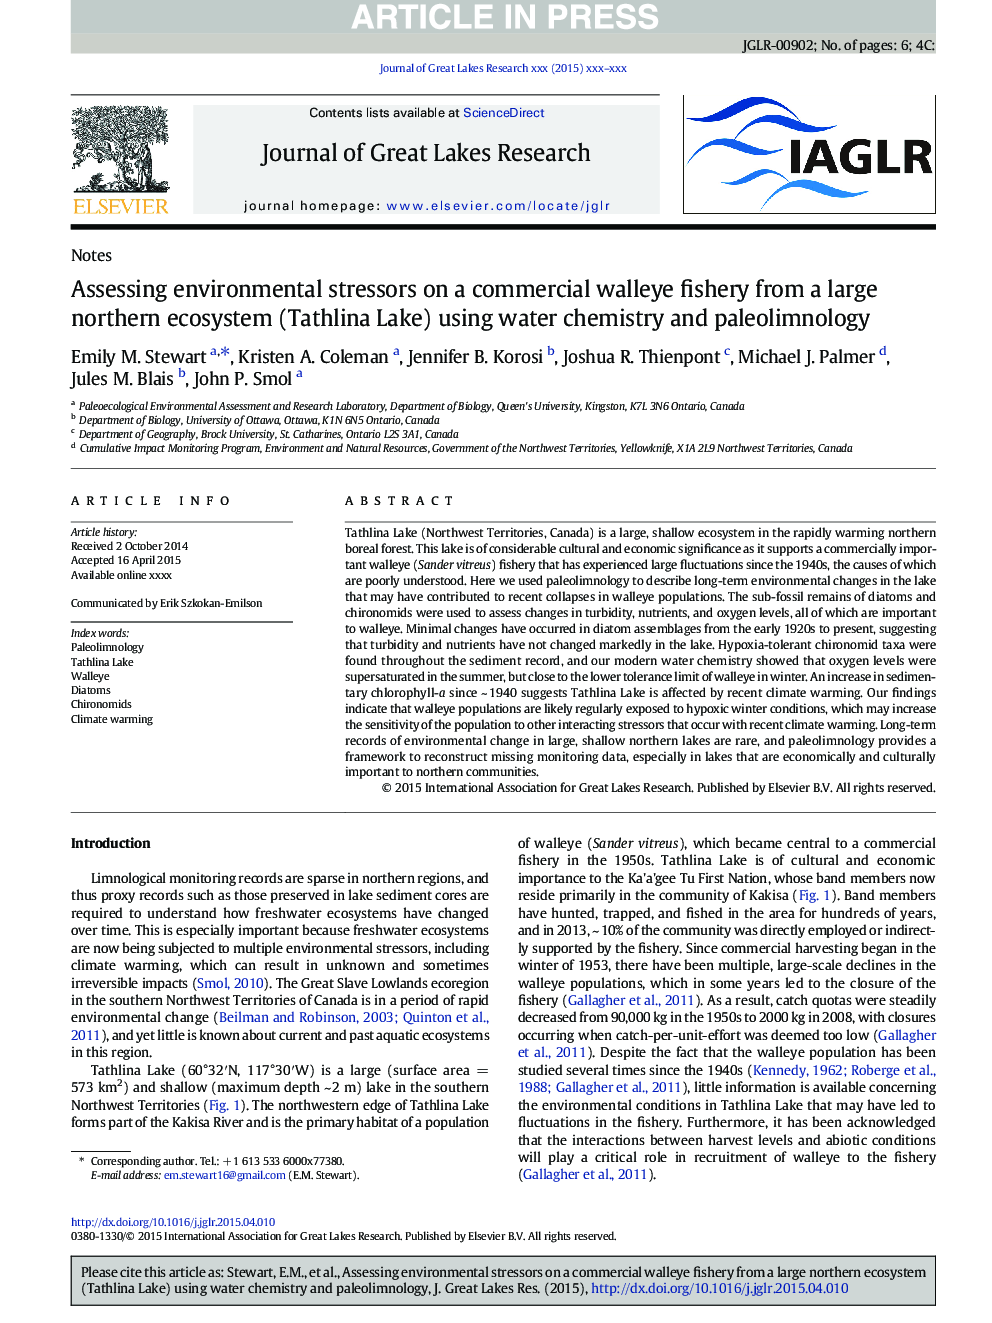 Assessing environmental stressors on a commercial walleye fishery from a large northern ecosystem (Tathlina Lake) using water chemistry and paleolimnology